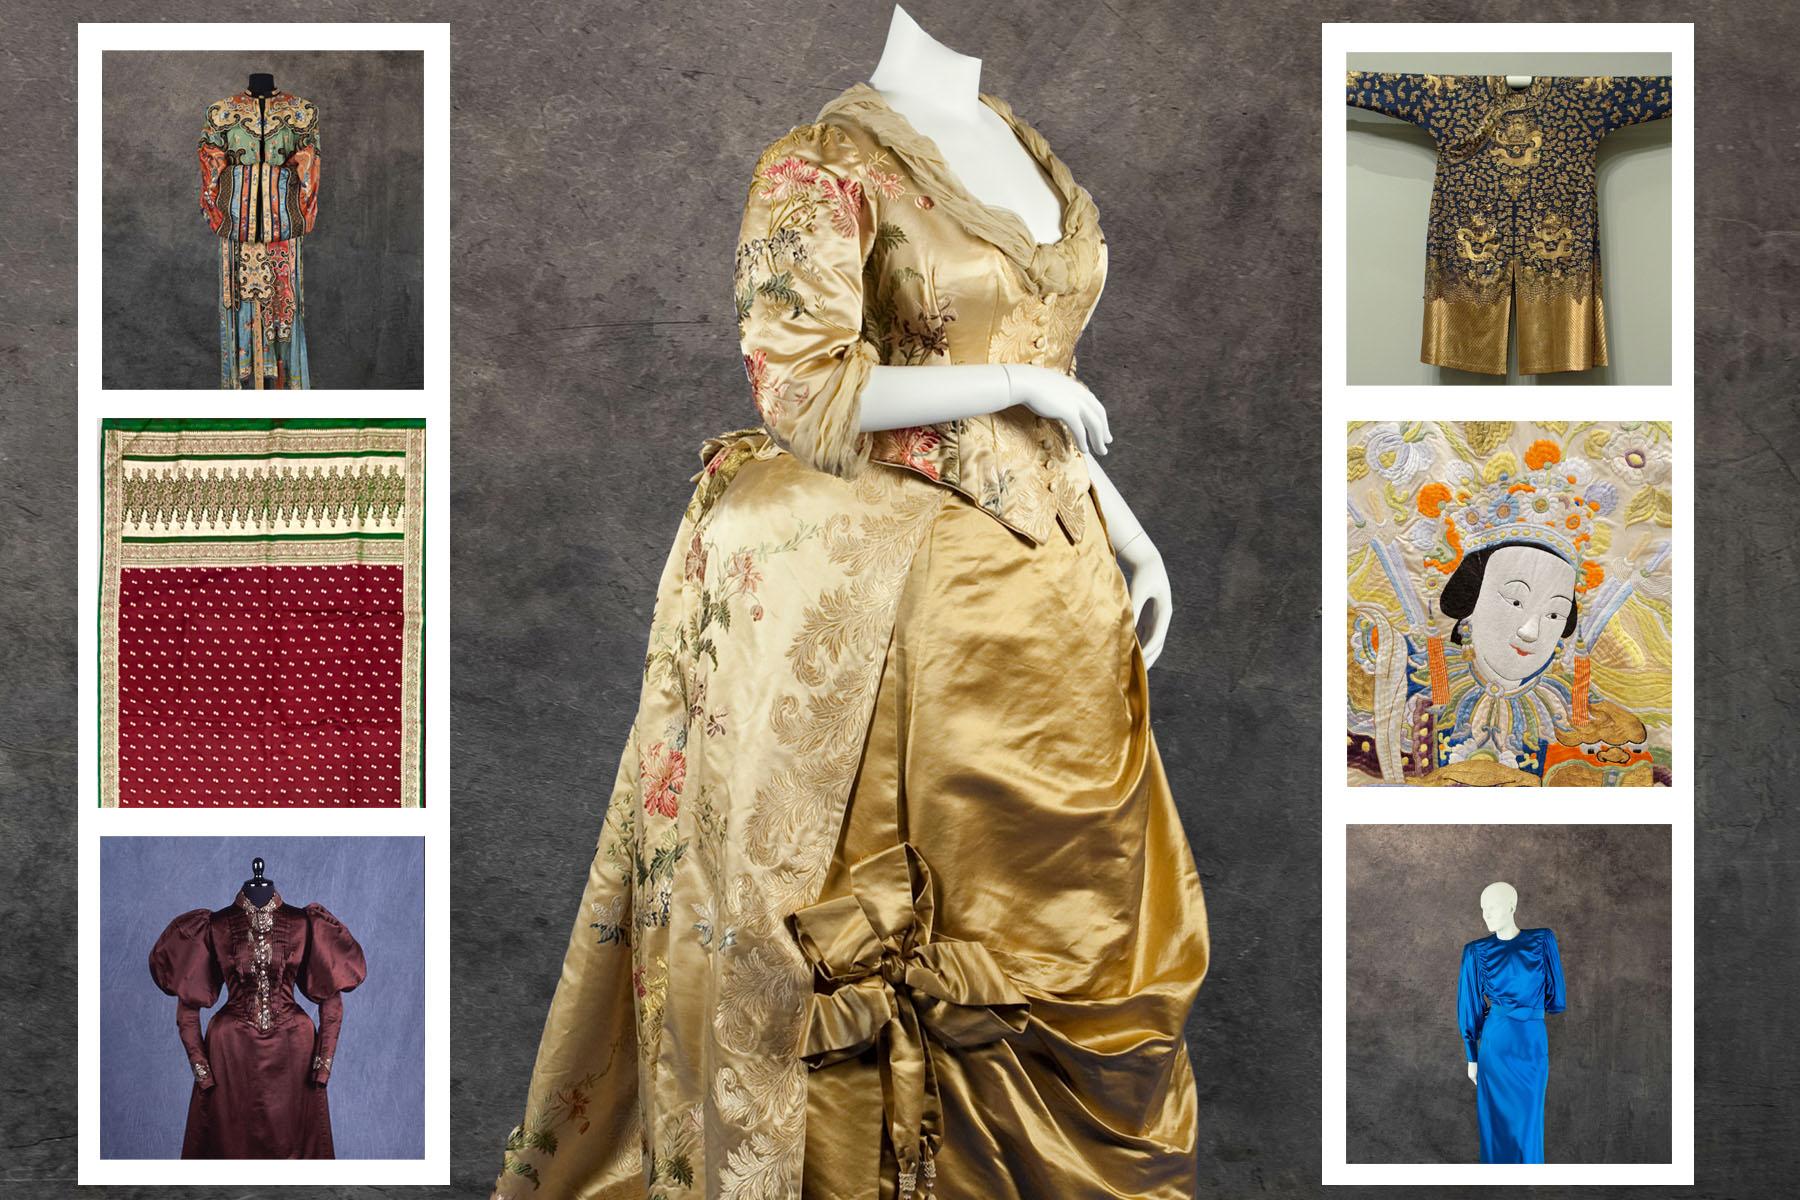 series of silk garments and textiles